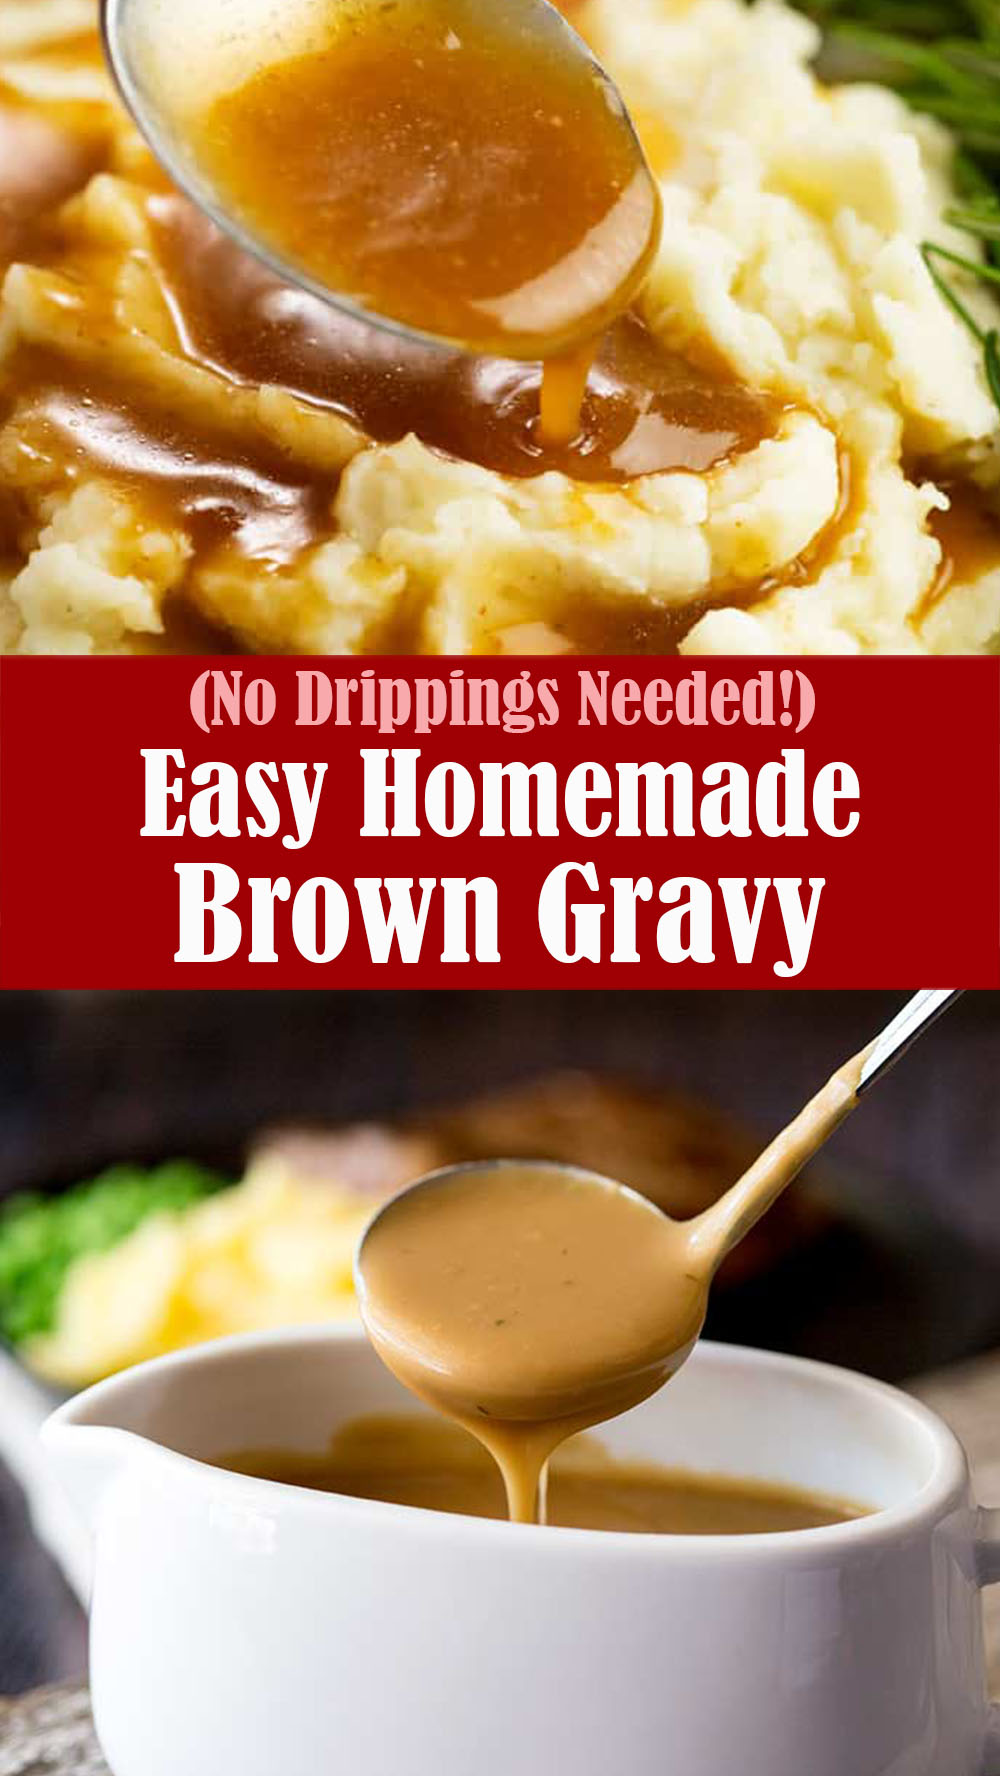 Easy Homemade Brown Gravy (No Drippings Needed!)